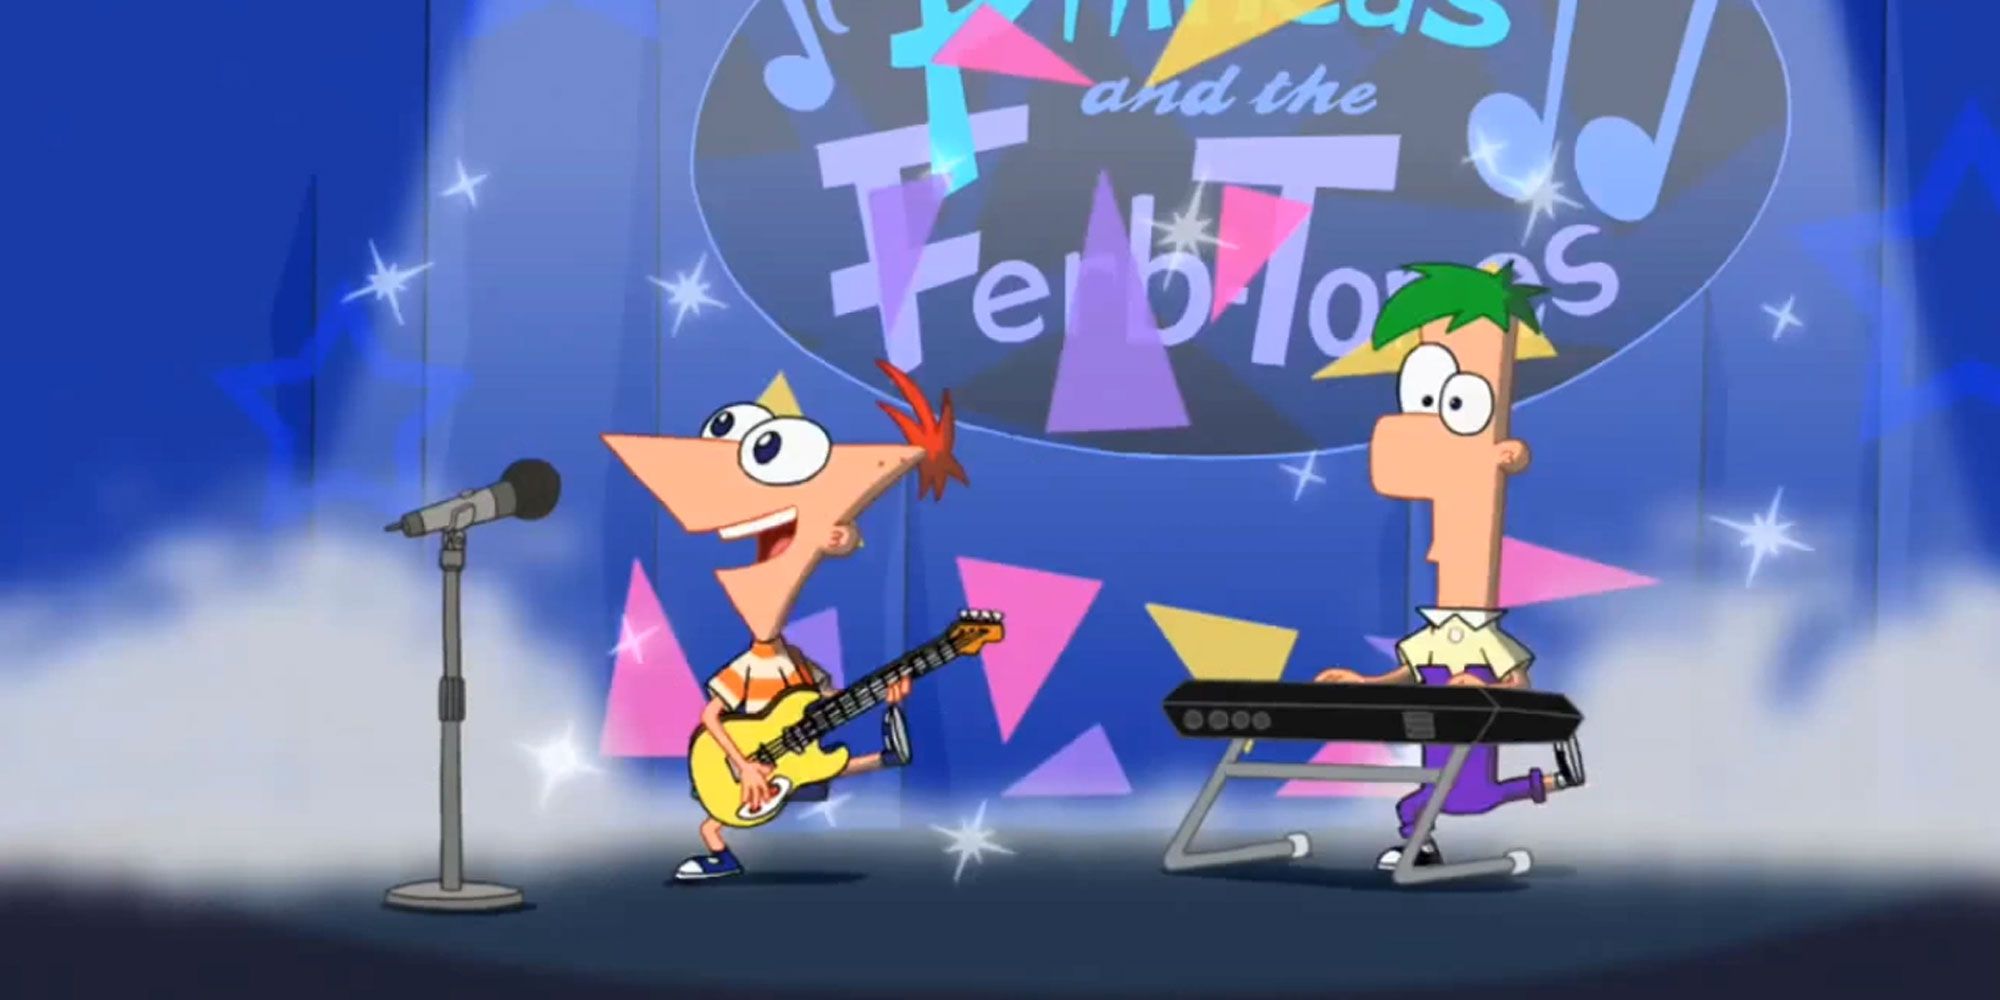 Phineas and Ferb Catchy Songs